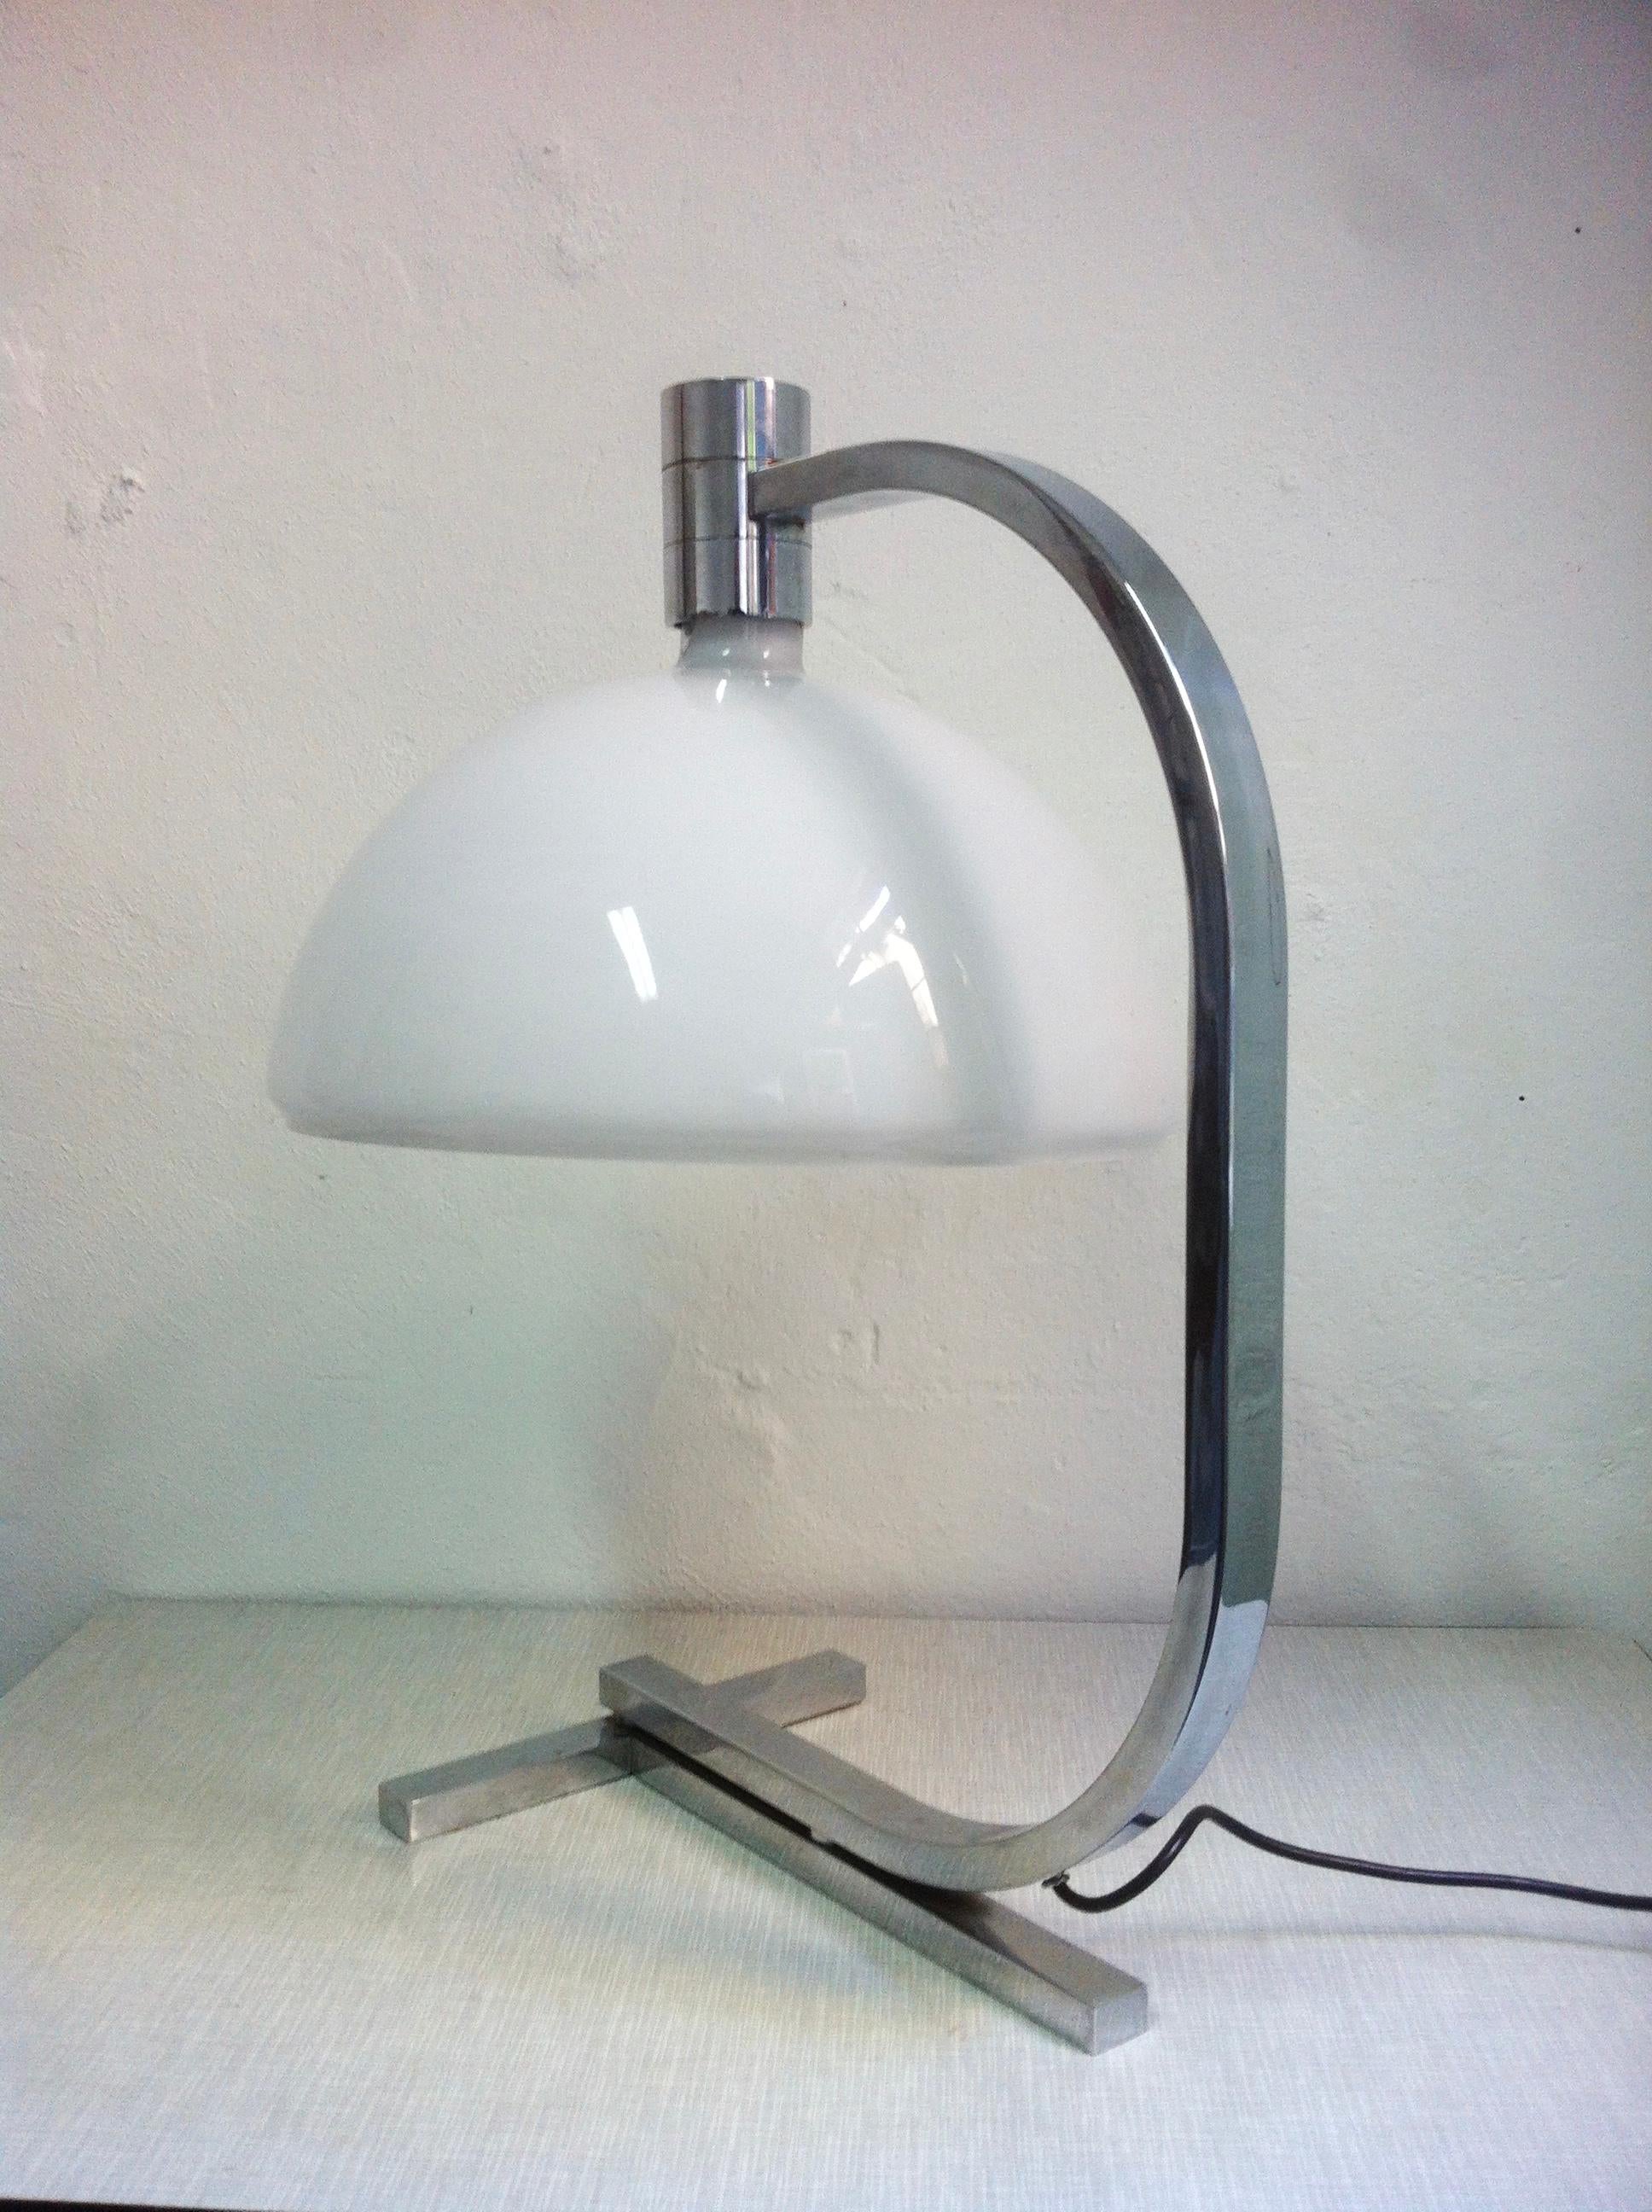 Midcentury AM/AS Table Lamp by Helg, Piva, and Albini for Sirrah Large, 1969 (Moderne der Mitte des Jahrhunderts) im Angebot